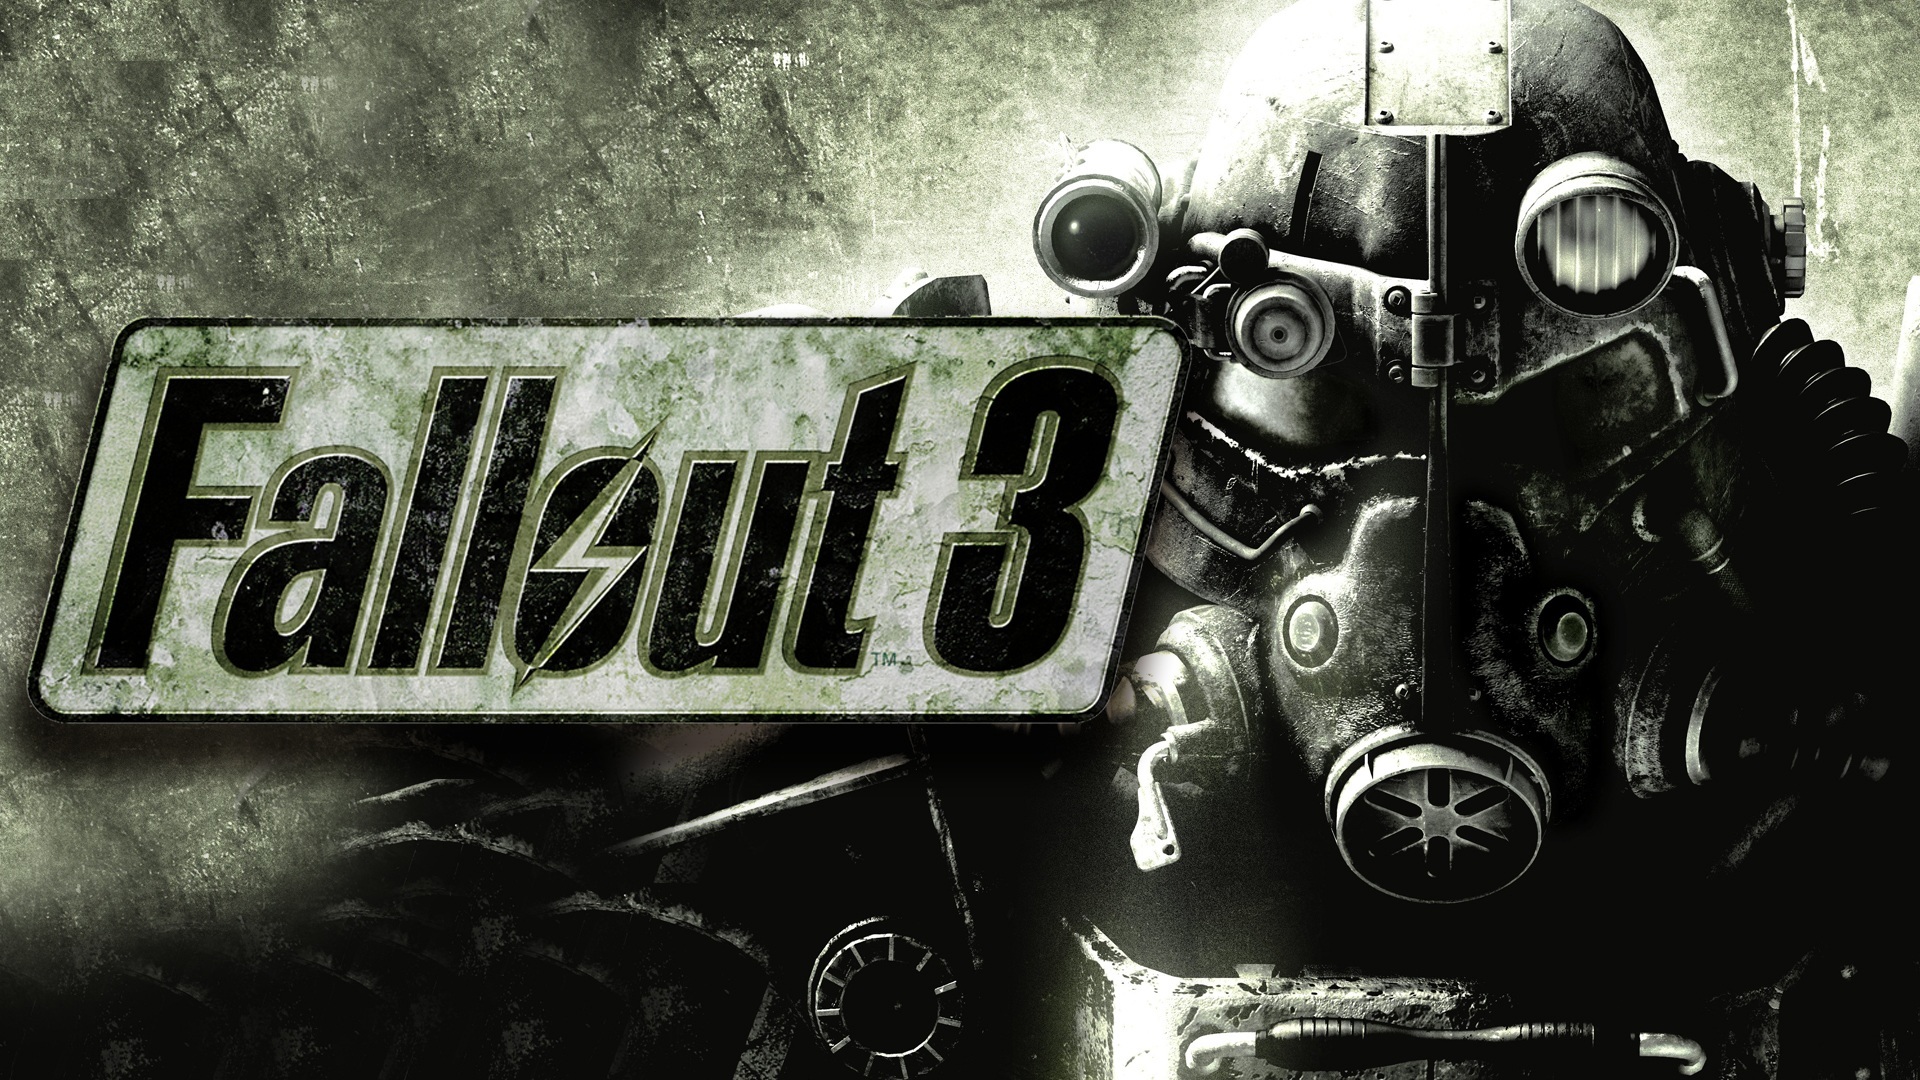 fallout 3 pc download free game of the year edition